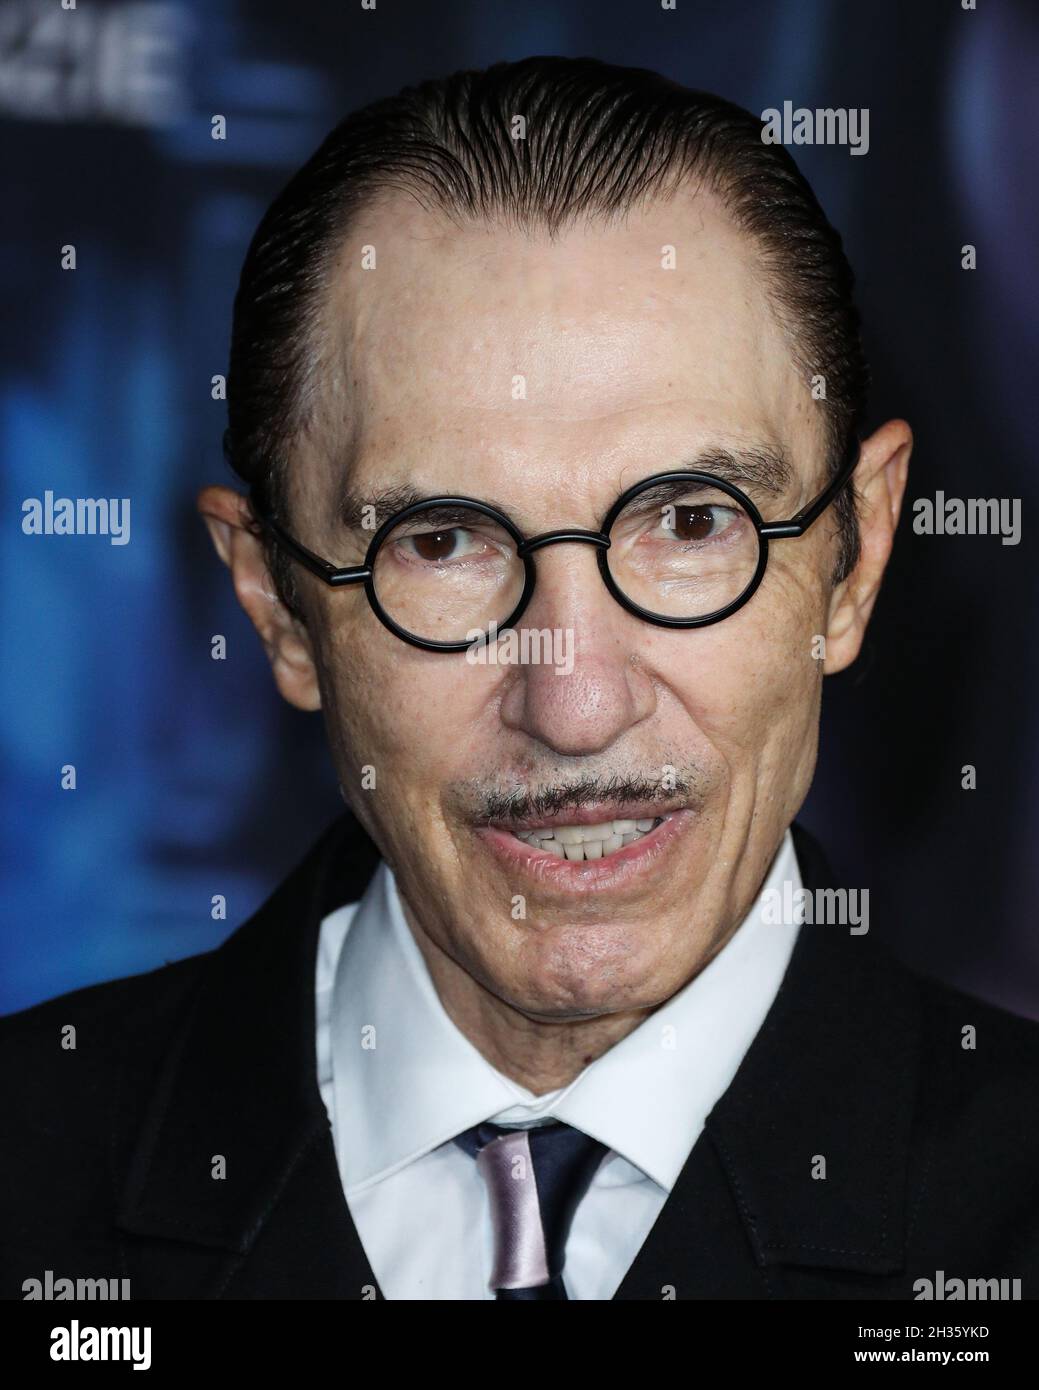 Los Angeles, United States. 25th Oct, 2021. LOS ANGELES, CALIFORNIA, USA - OCTOBER 25: Musician Ron Mael arrives at the Los Angeles Premiere Of Focus Features' 'Last Night In Soho' held at the Academy Museum of Motion Pictures on October 25, 2021 in Los Angeles, California, United States. (Photo by Xavier Collin/Image Press Agency) Credit: Image Press Agency/Alamy Live News Stock Photo